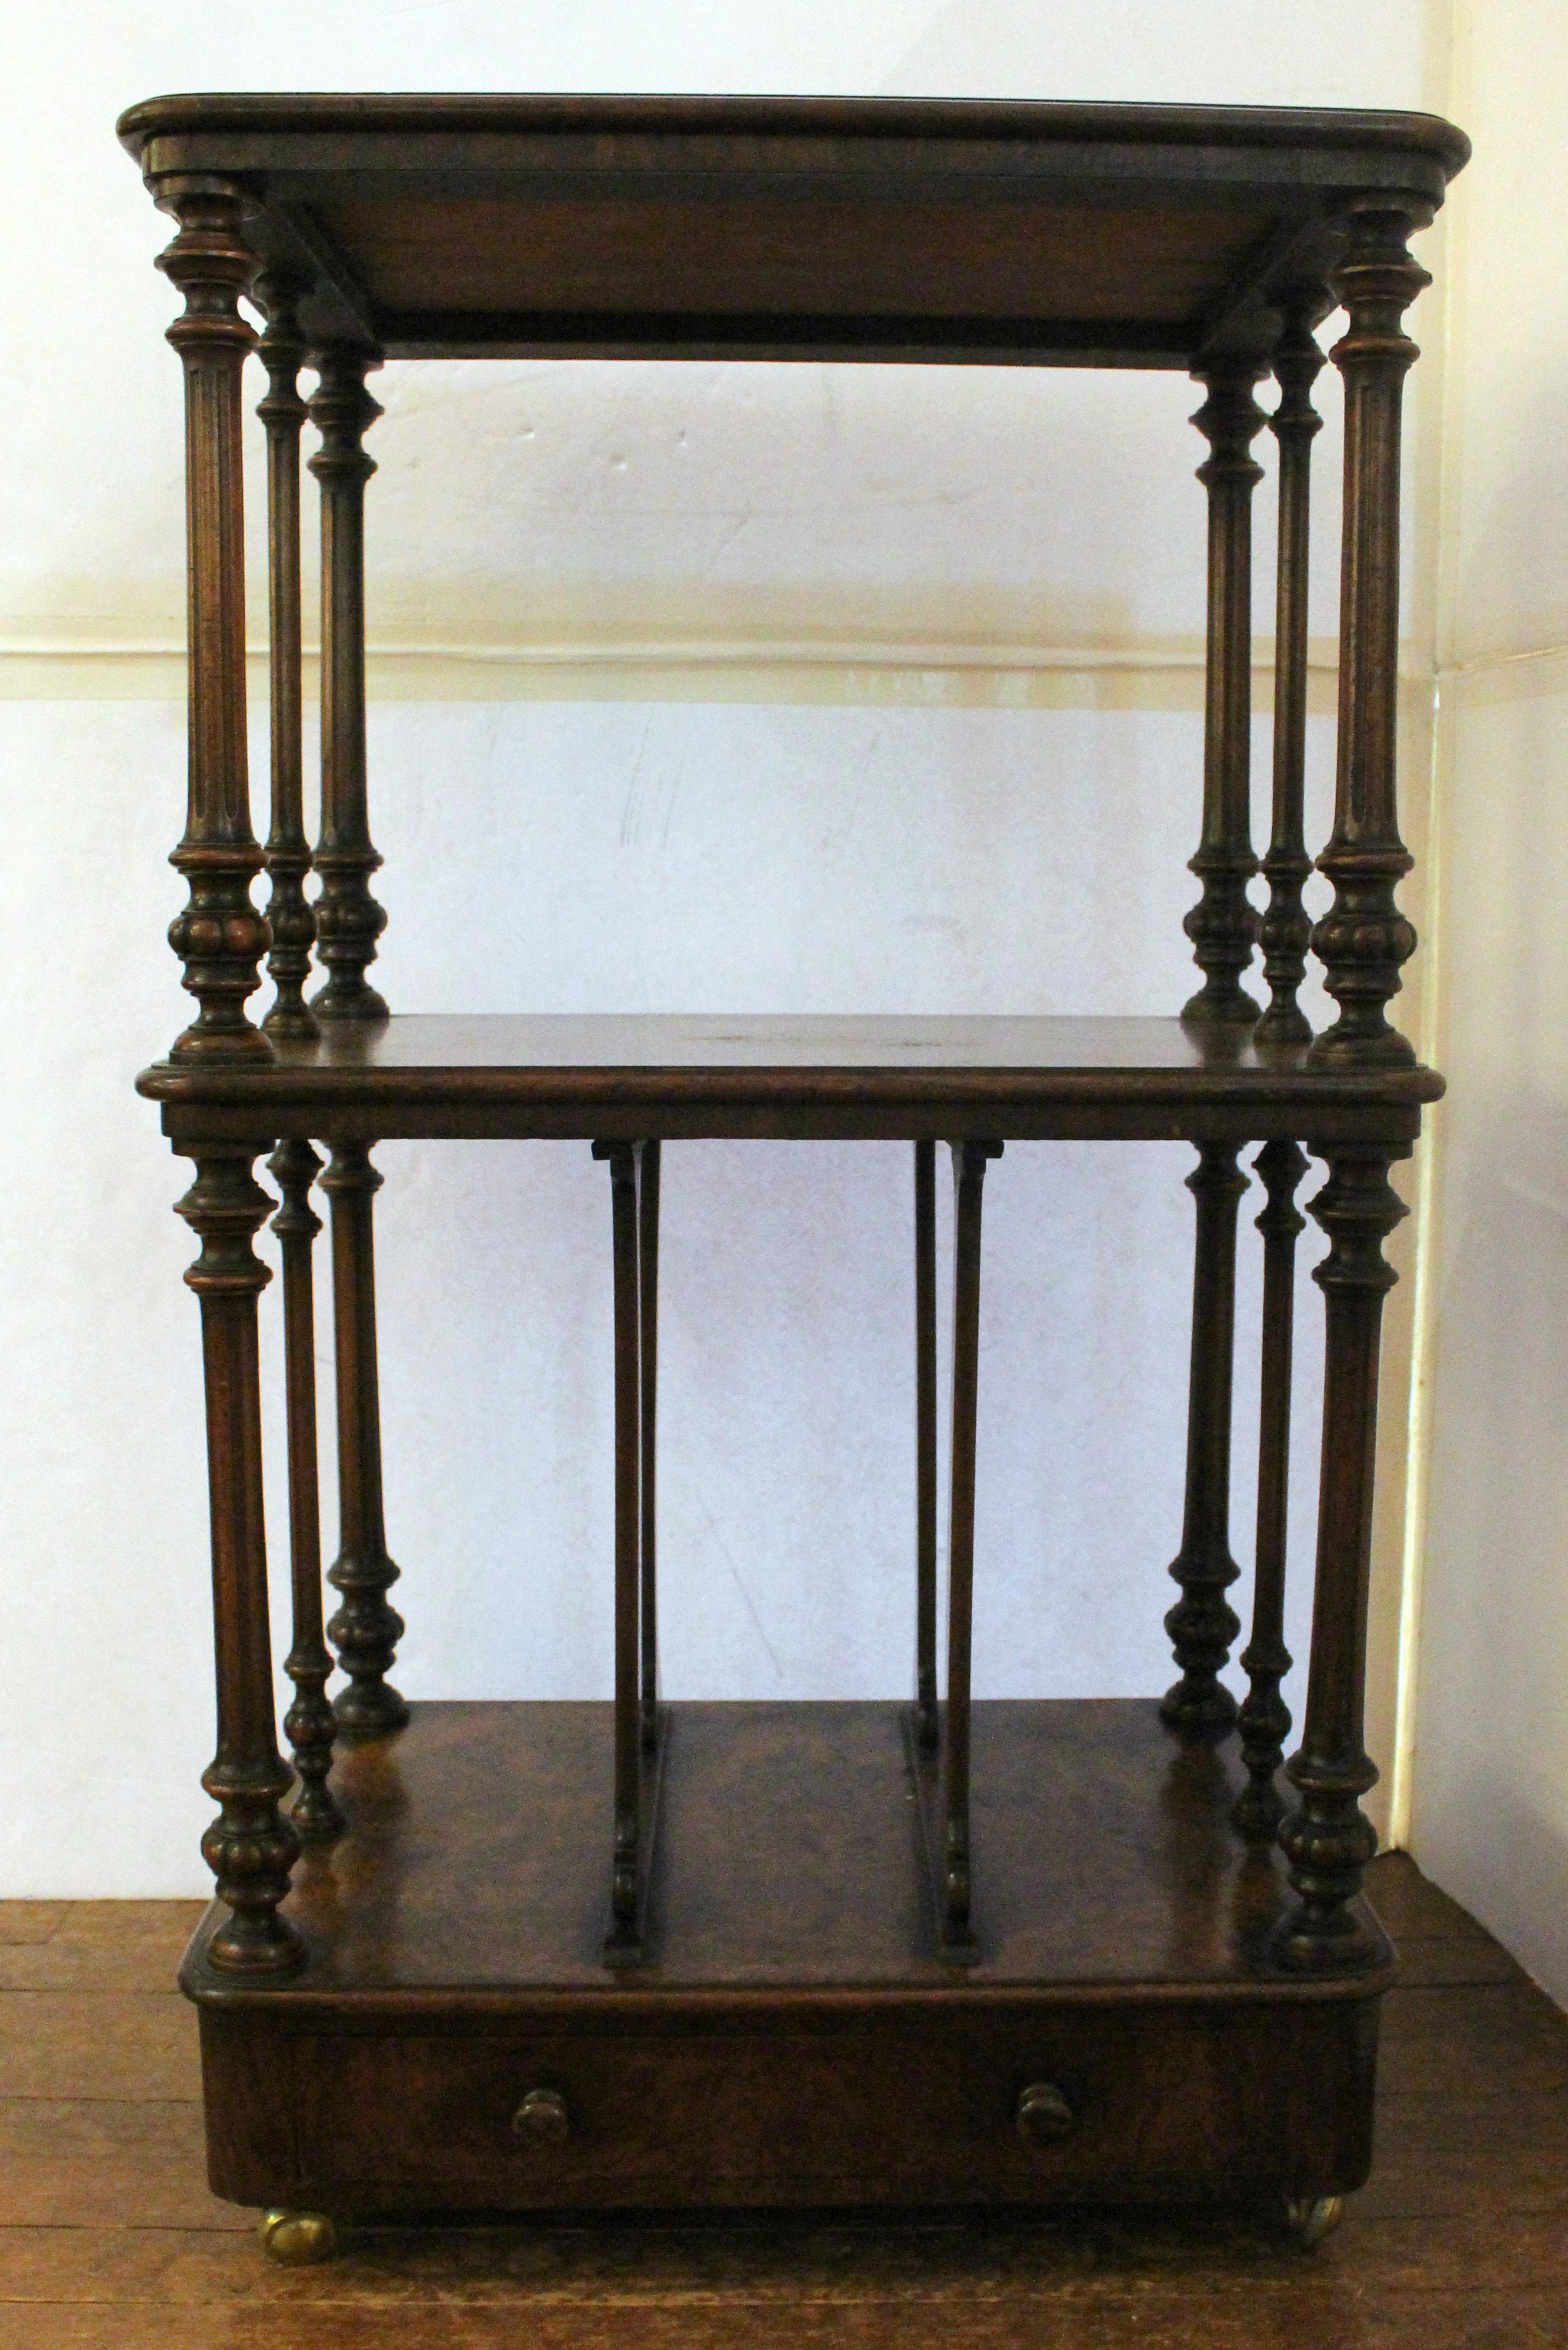 Circa 1860-80 folio or what-not stand etagere, English. For large vertical folios. Walnut & burl walnut. Turned, reeded & carved standards. Drawer in base. On casters. Once with a gallery. Provenance: Estate of Katharine Reid, former director